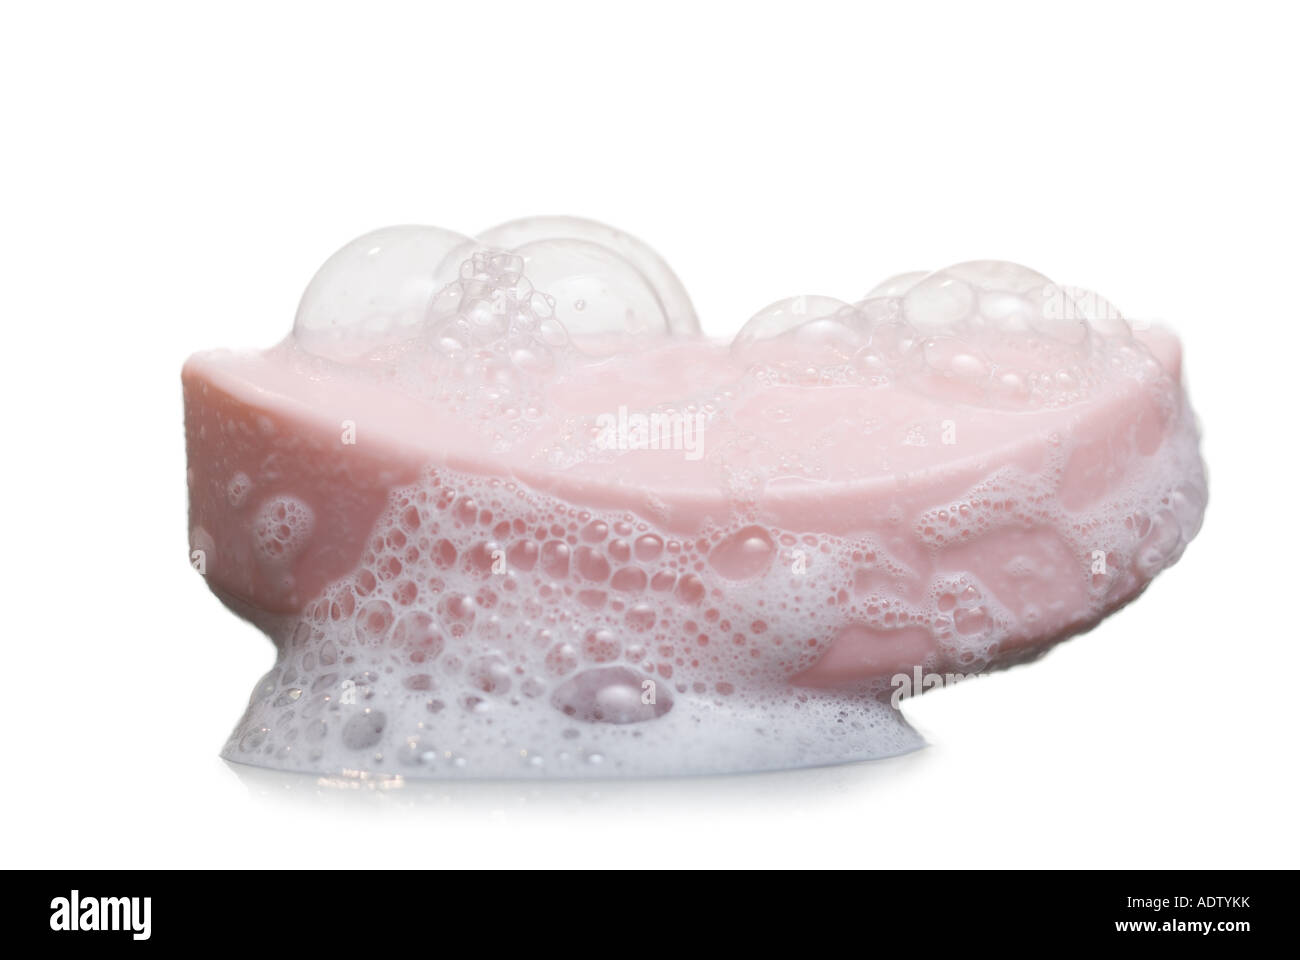 Bar of soap with suds Stock Photo